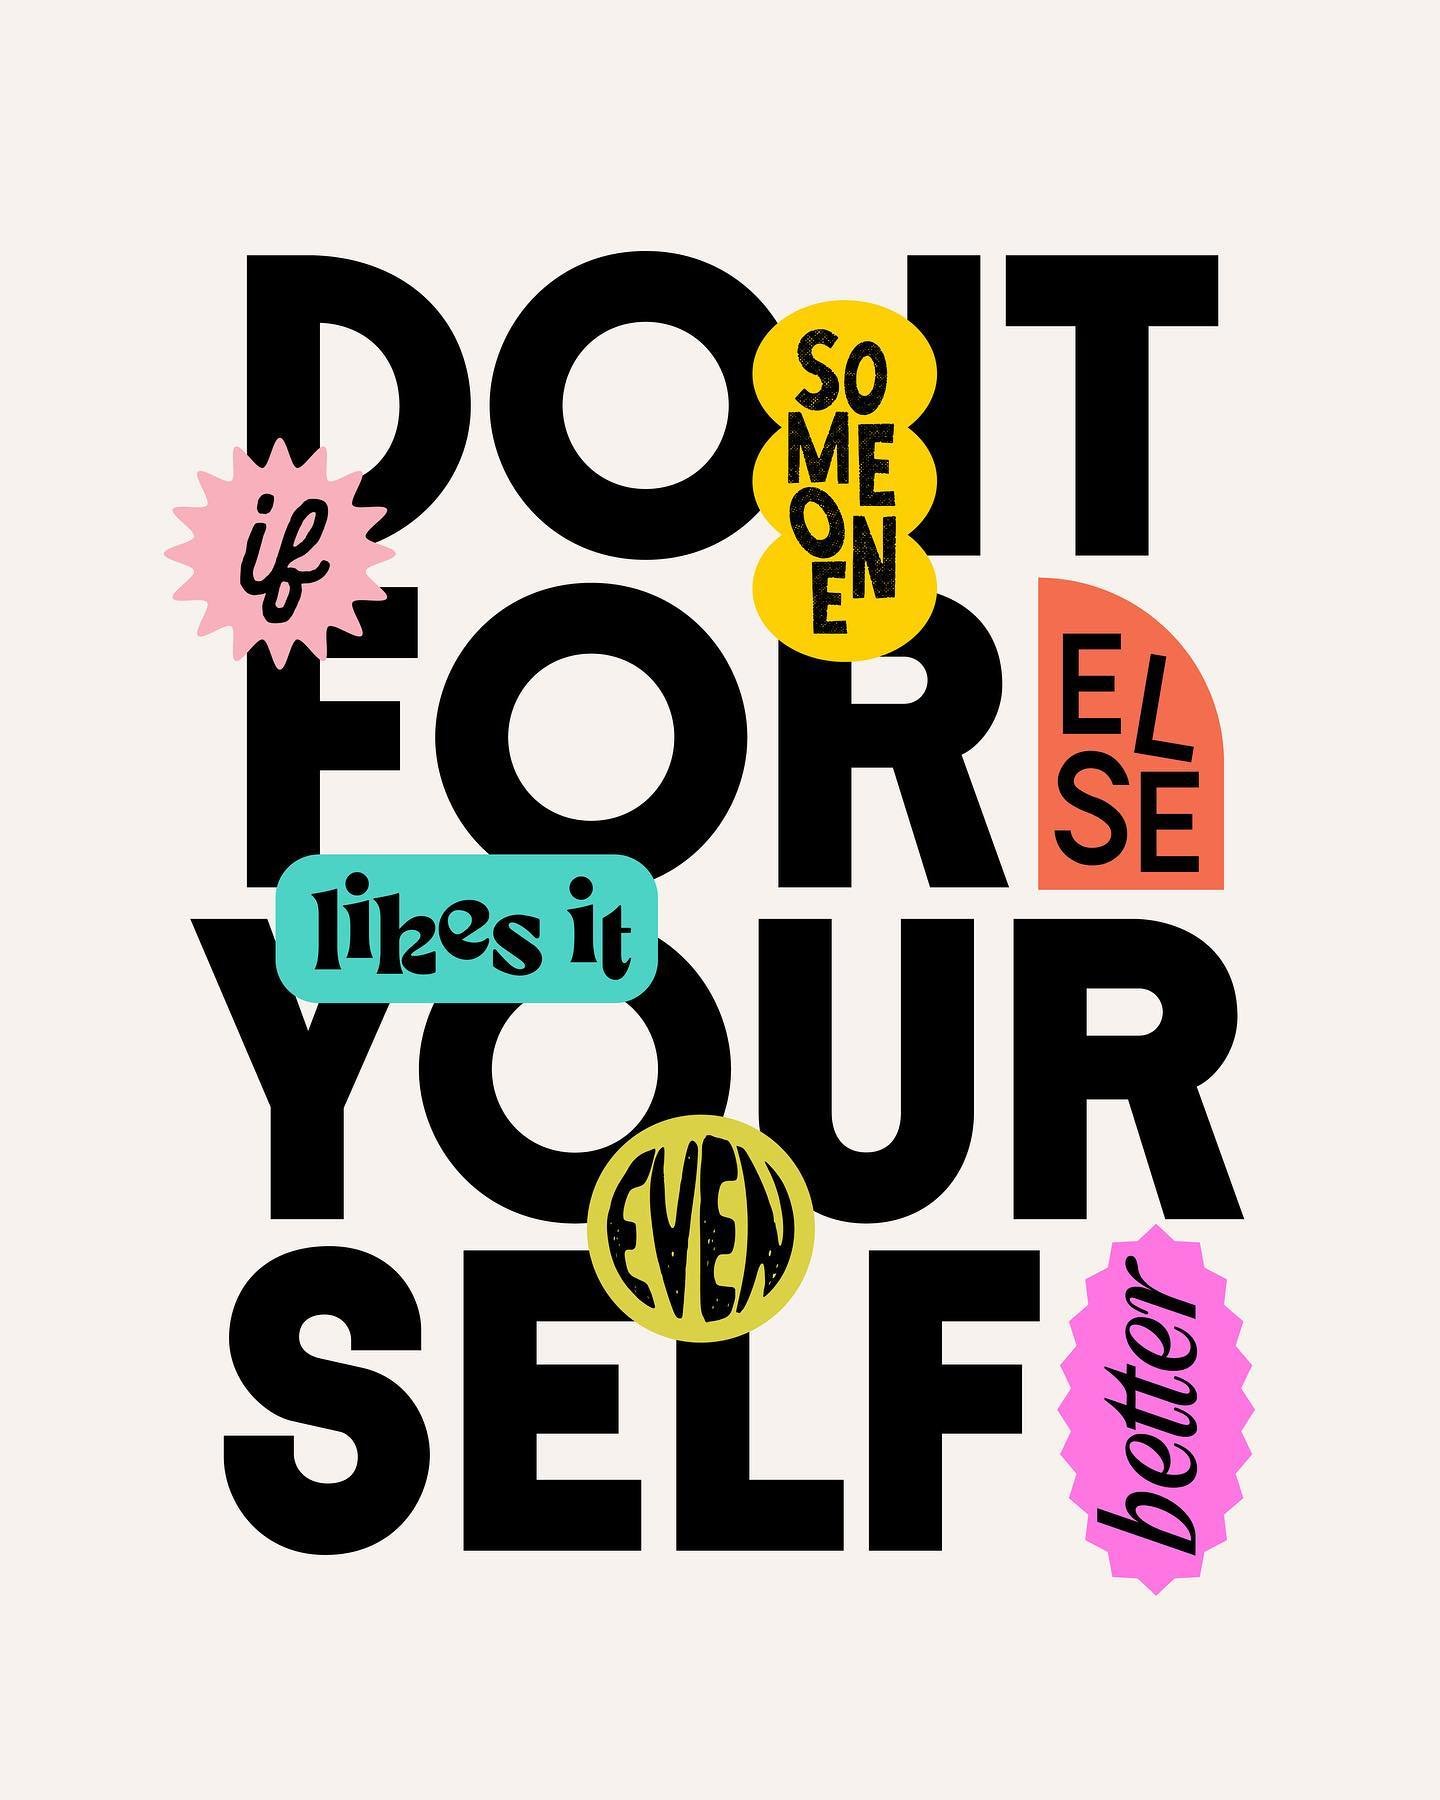 This is your weekly reminder to just create and put yourself out there. Stop worrying about what others will think, just do it for yourself 💖😘🤗🫶🏻
.
.
.
#graphicdesigncommunity #graphicdesigndaily #designadvice #designtips #digitaldesign #freelan